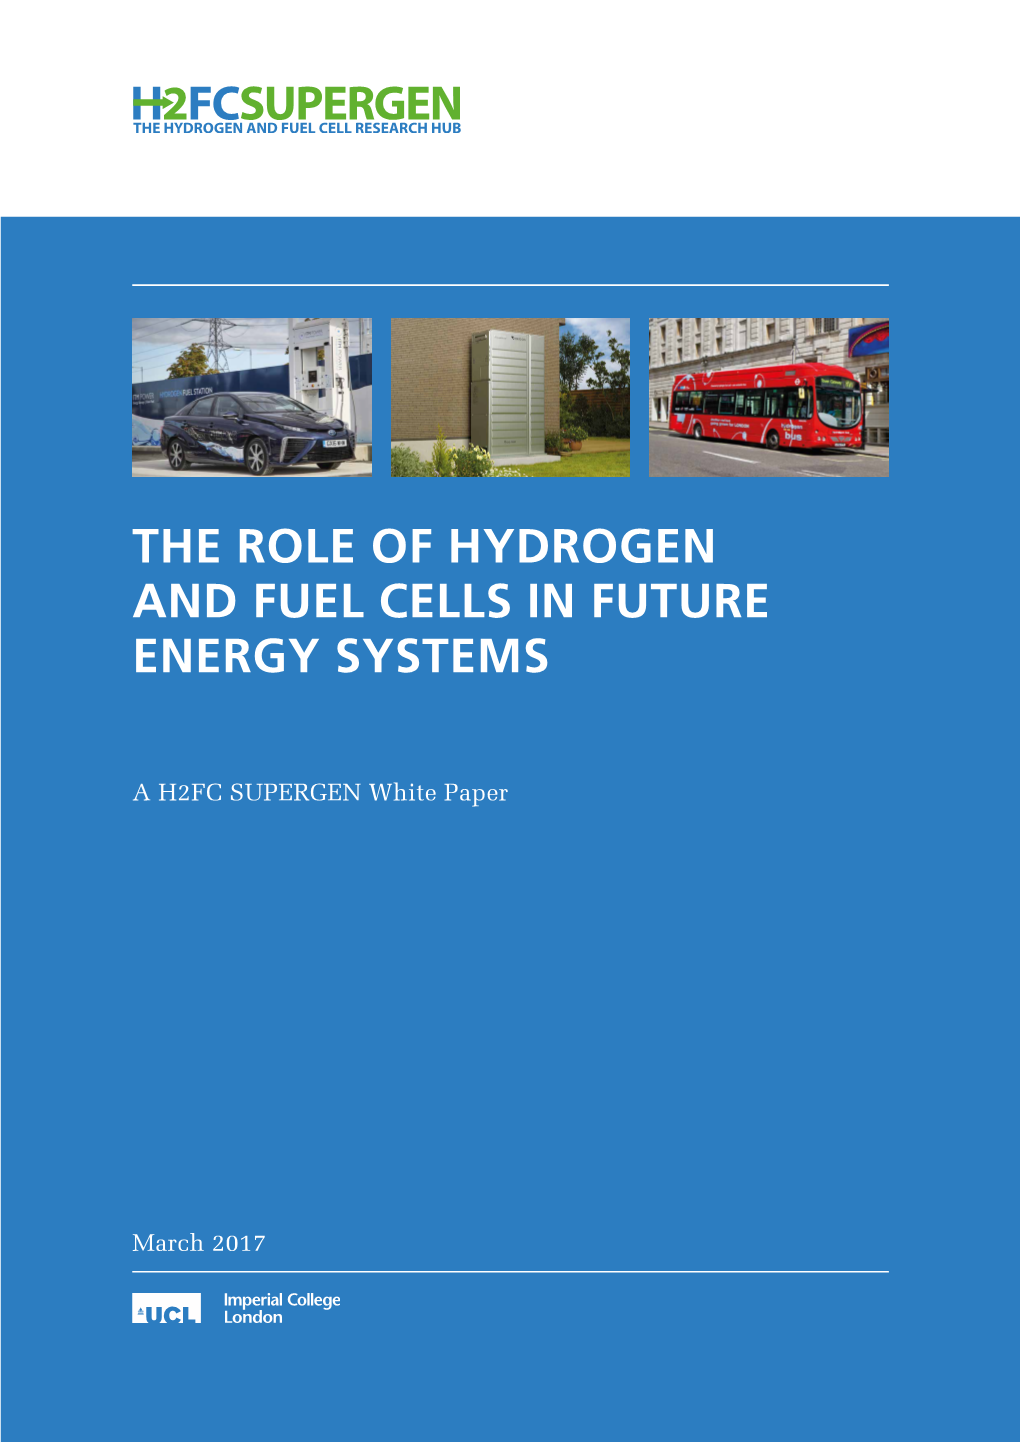 The Role of Hydrogen and Fuel Cells in Future Energy Systems